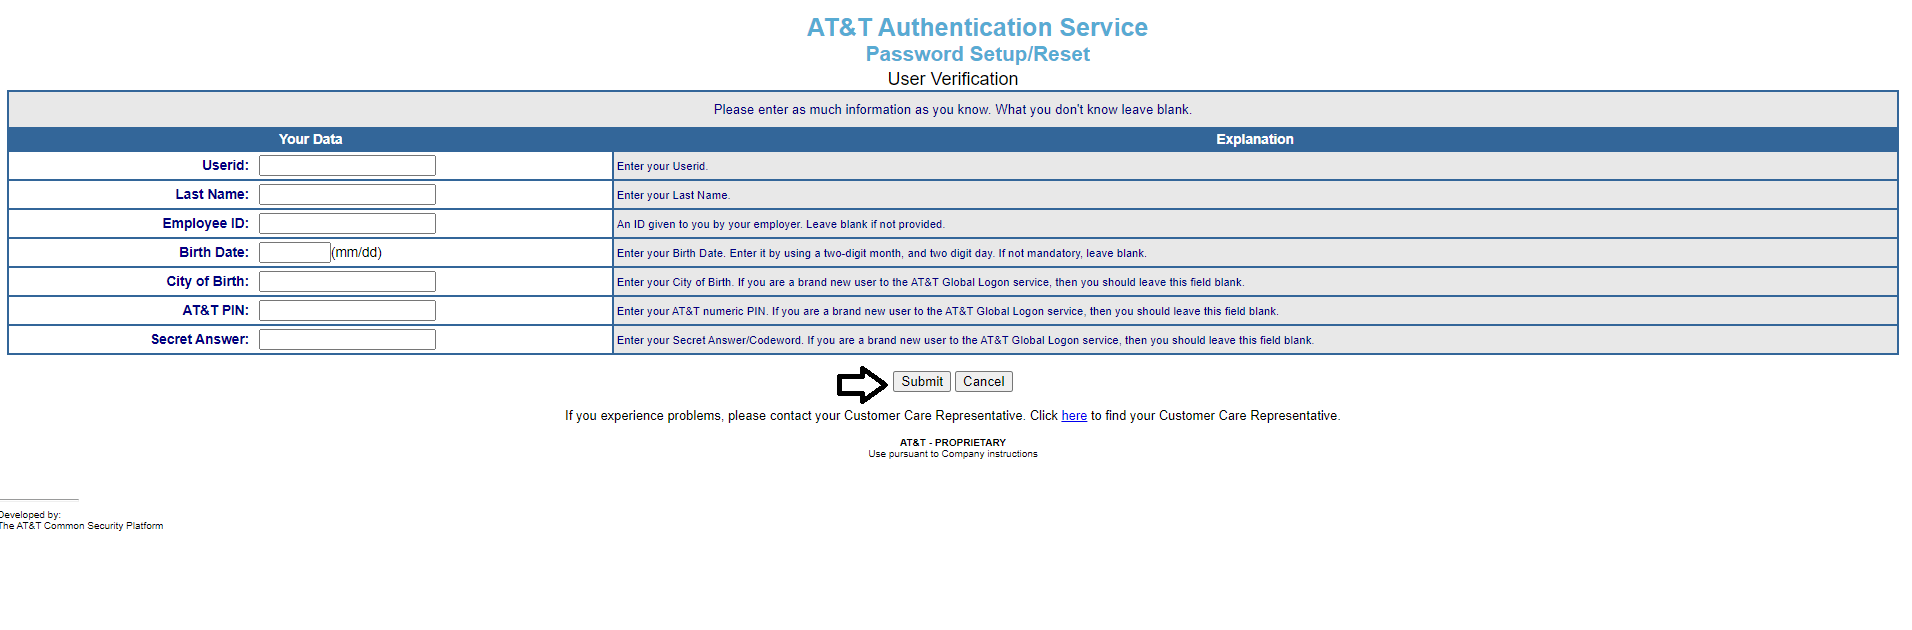 enter required details and click on submit to reset hronestop att login password